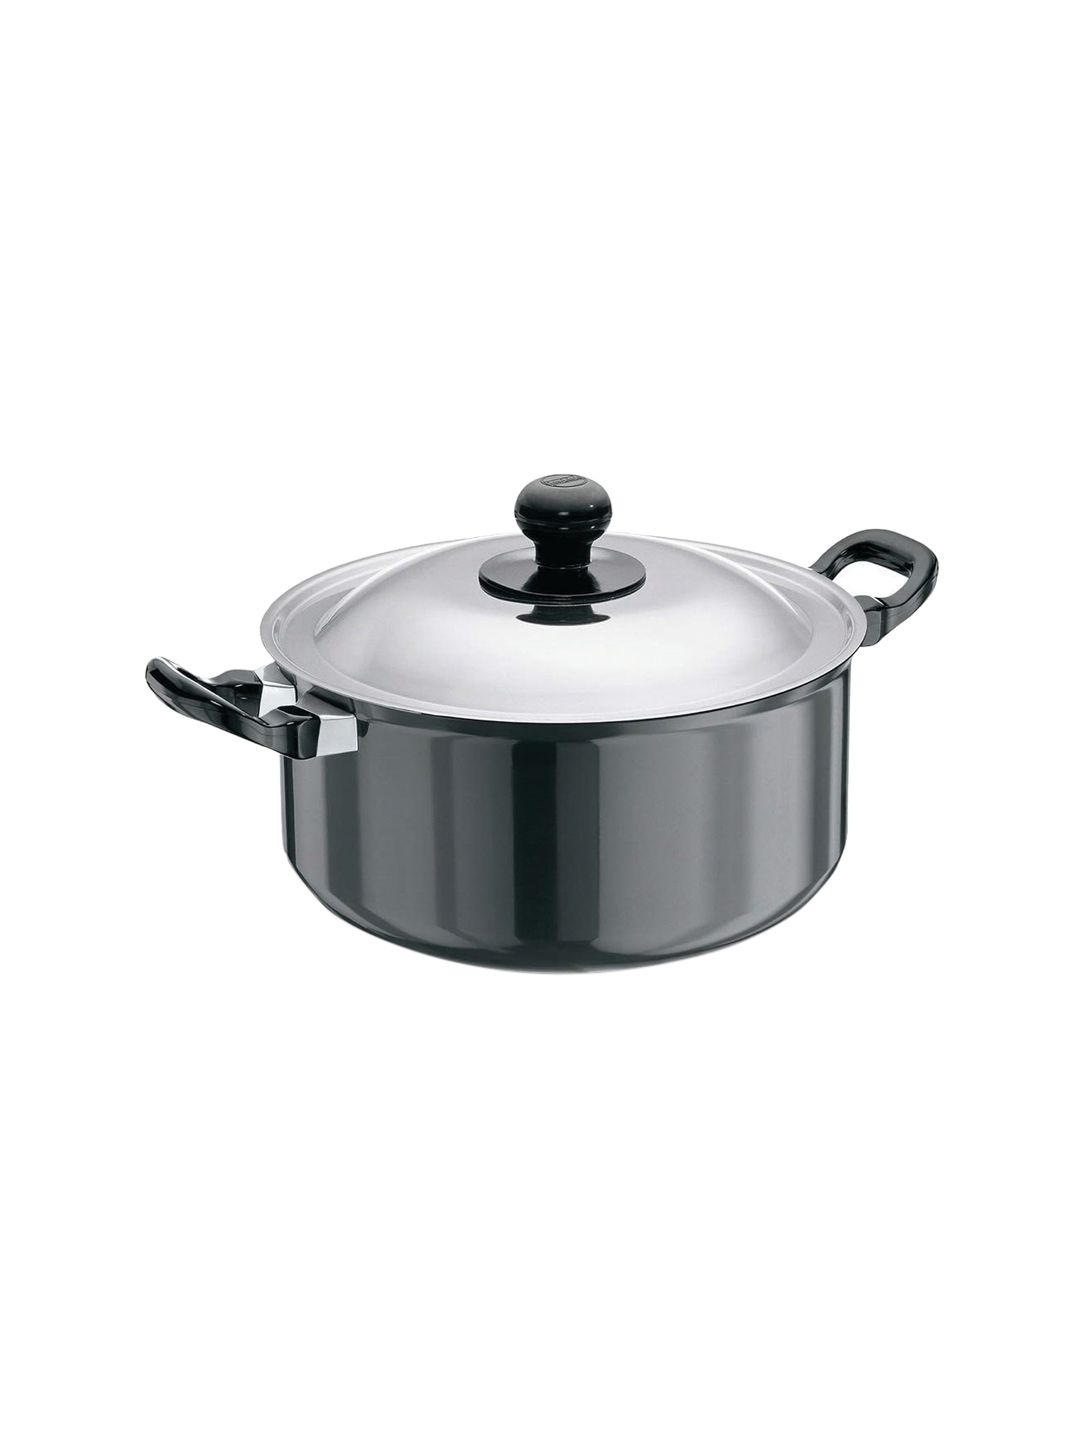 Hawkins Black & Silver-Toned Futura Nonstick Cook-N-Serve 5 Litres Stewpot With Lid Price in India